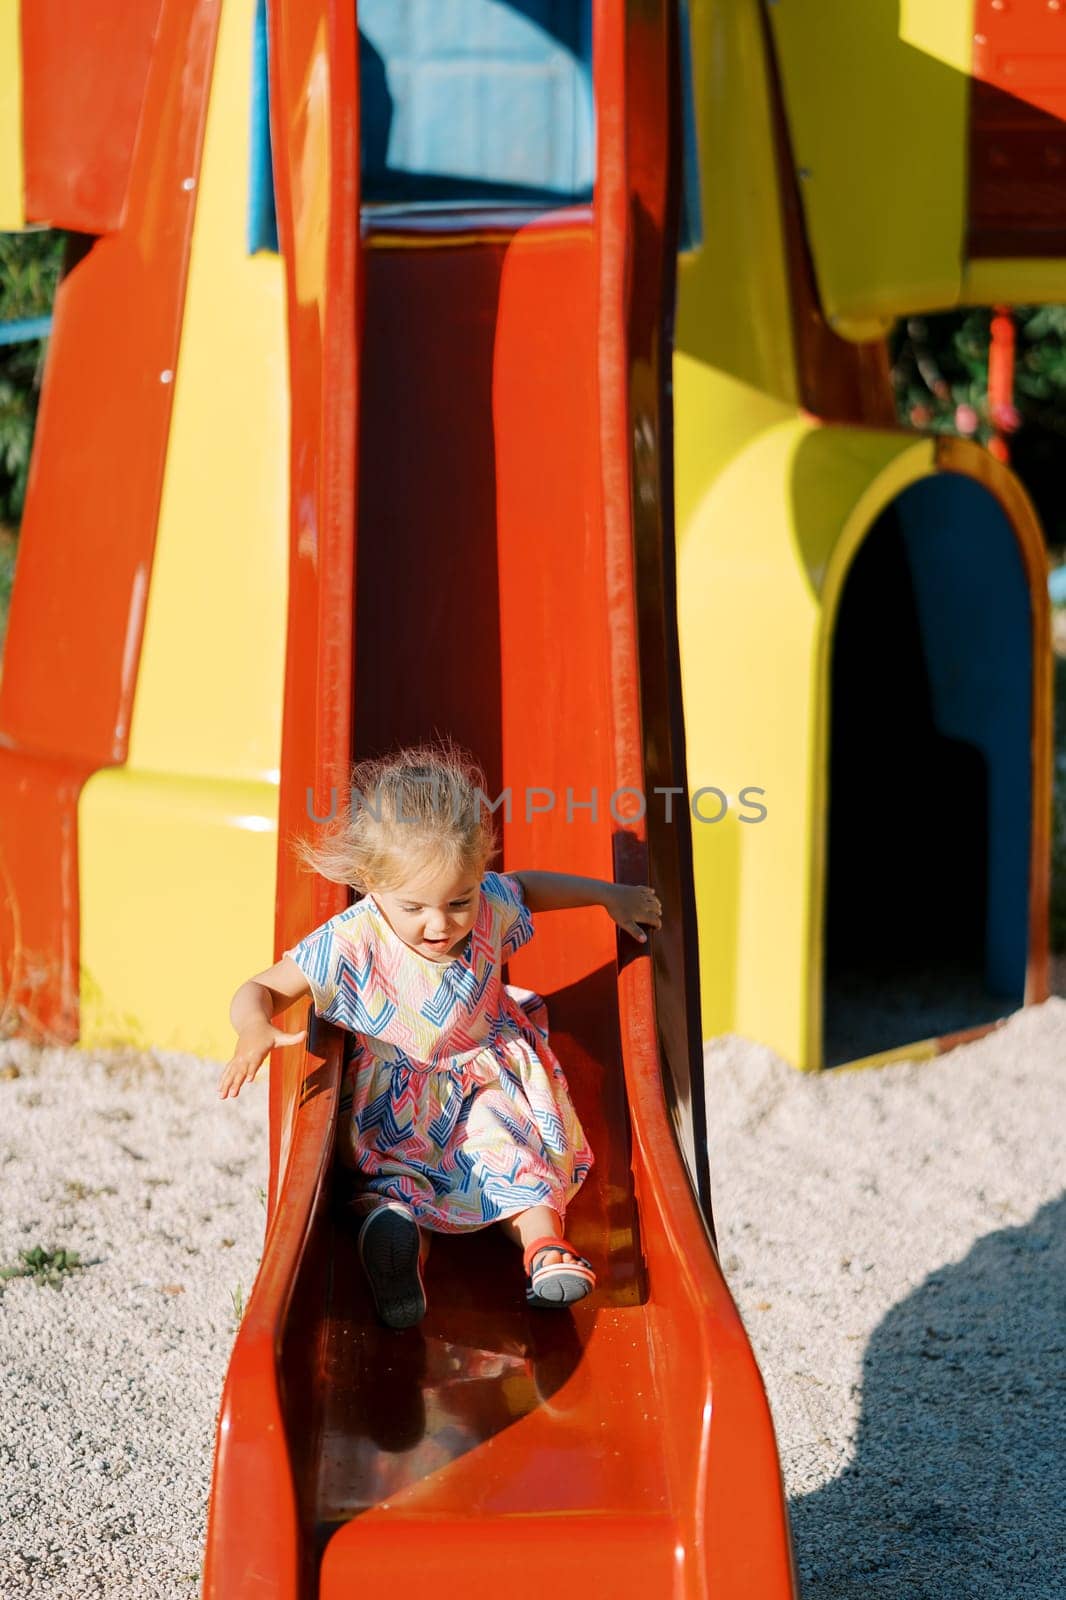 Little girl with flying hair slides down a slide holding onto a handrail by Nadtochiy